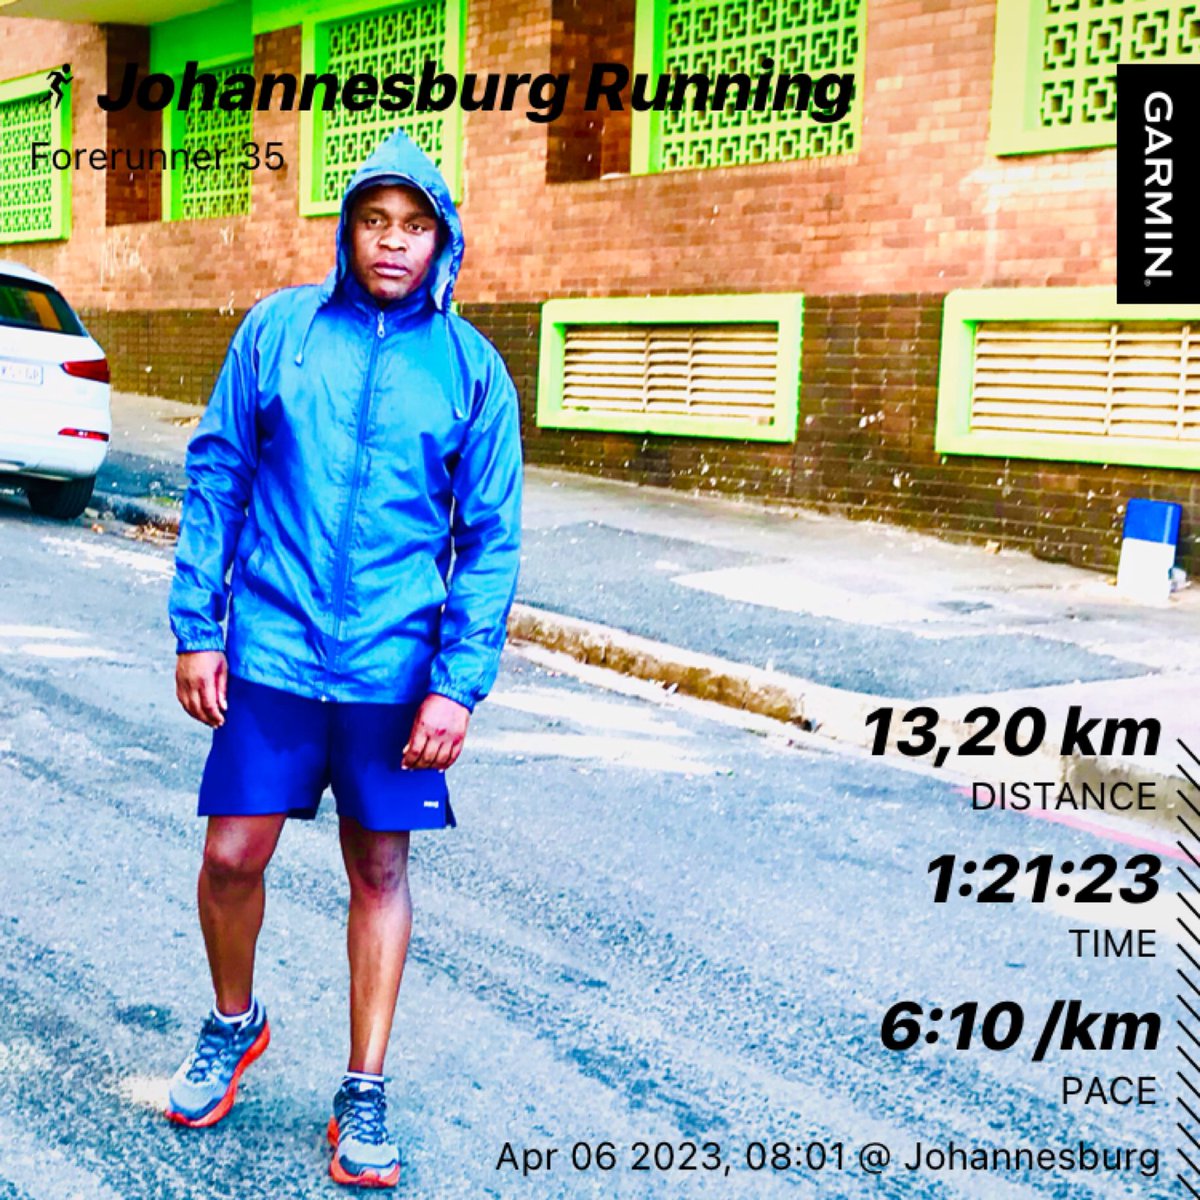 The focus before the Easter Weekend RunMania. This is how i rep my hood.
#UltimateHumanRace 
#TheJourneyIsTheDestination  - Comrades